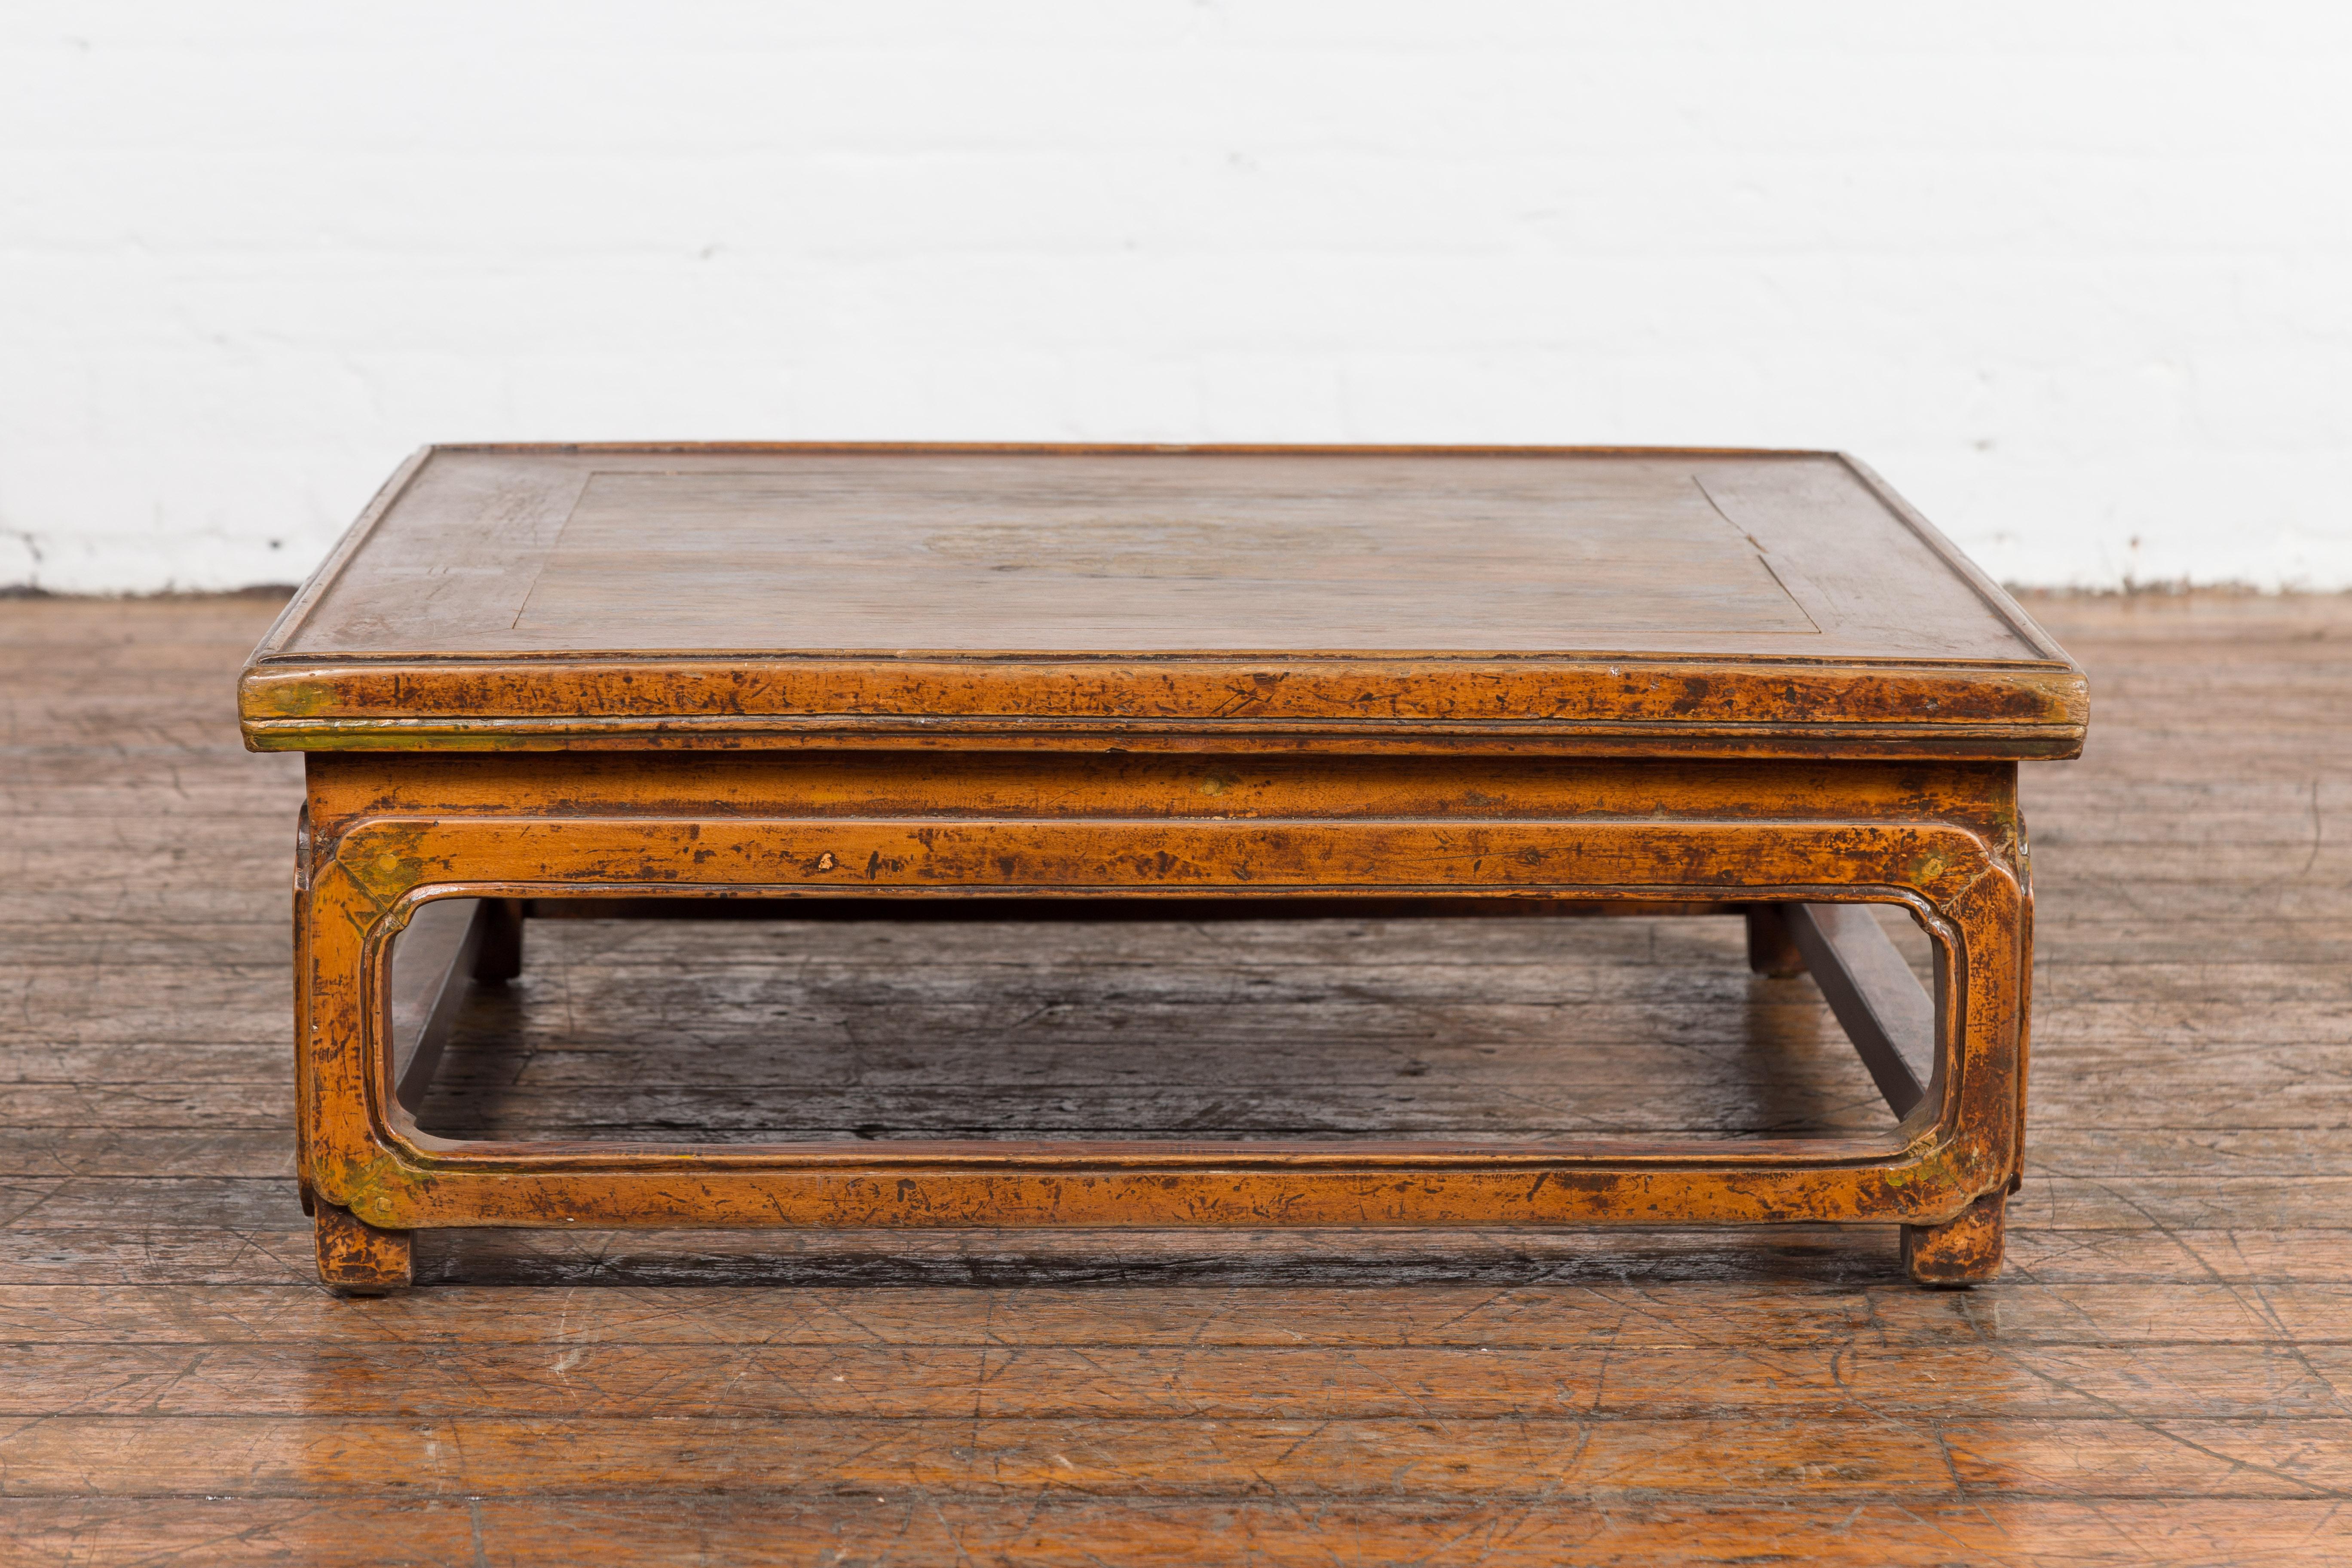 A Chinese Qing Dynasty period low Kang coffee table from the 19th century with square top and hand-painted medallion in the center. An exemplar of oriental allure and historic charm, this Chinese low Kang coffee table hails from the prestigious Qing